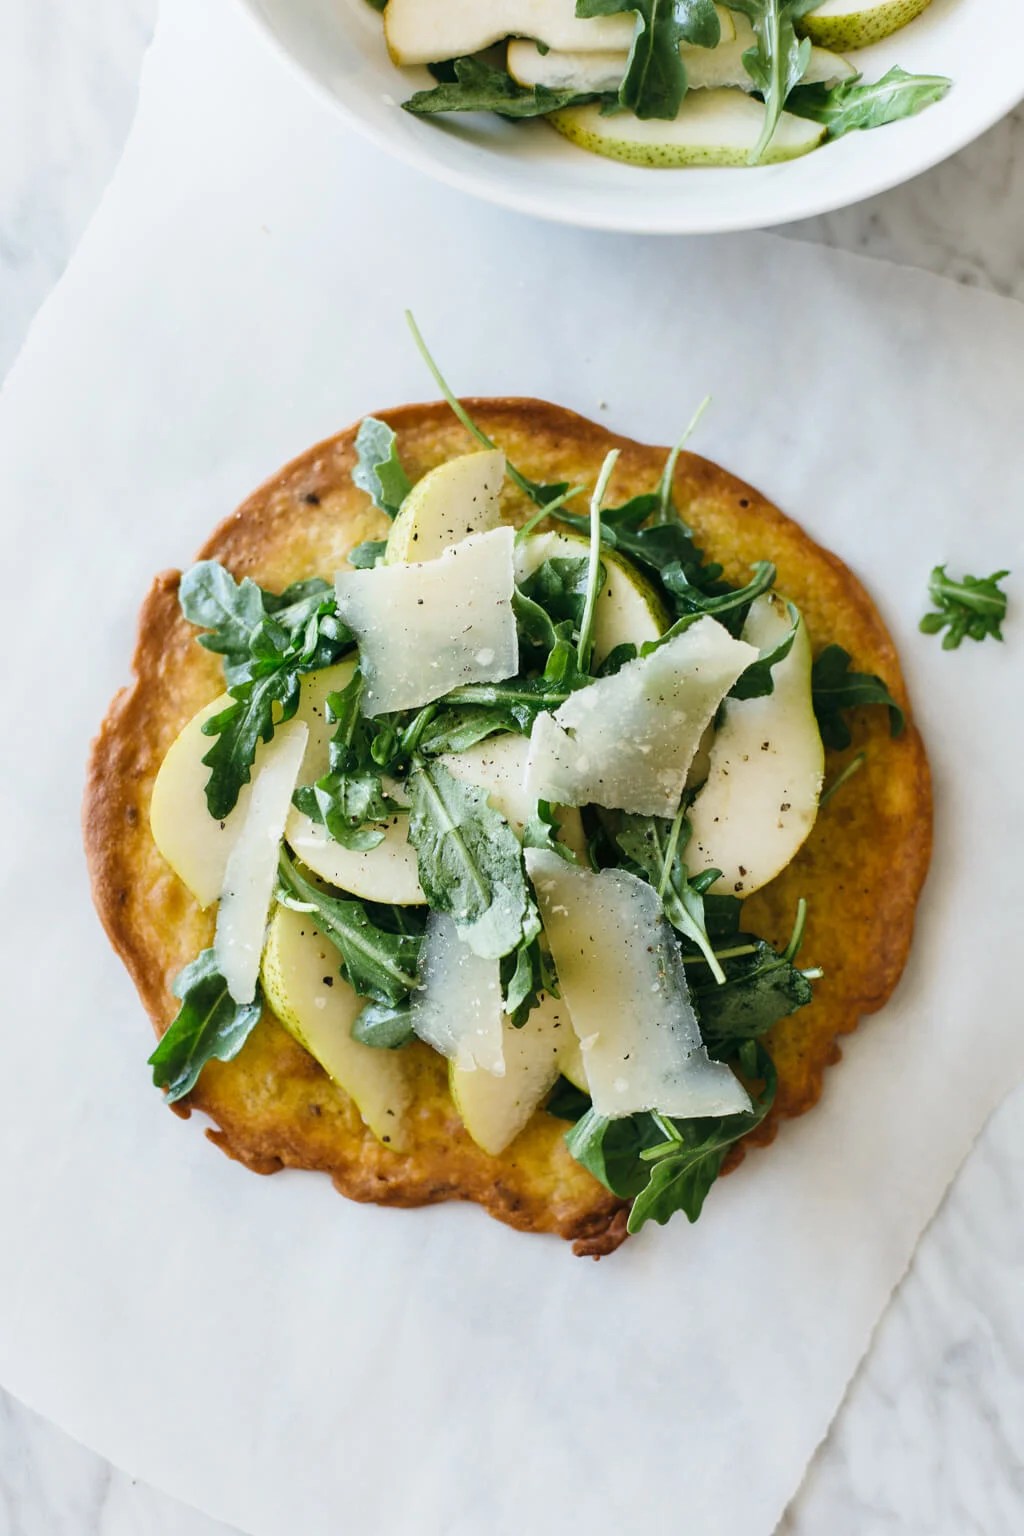 (gluten-free, grain-free) Crispy socca with pear and arugula salad. Made with chickpea flour, this crispy socca becomes the perfect base for a delicious and healthy salad.